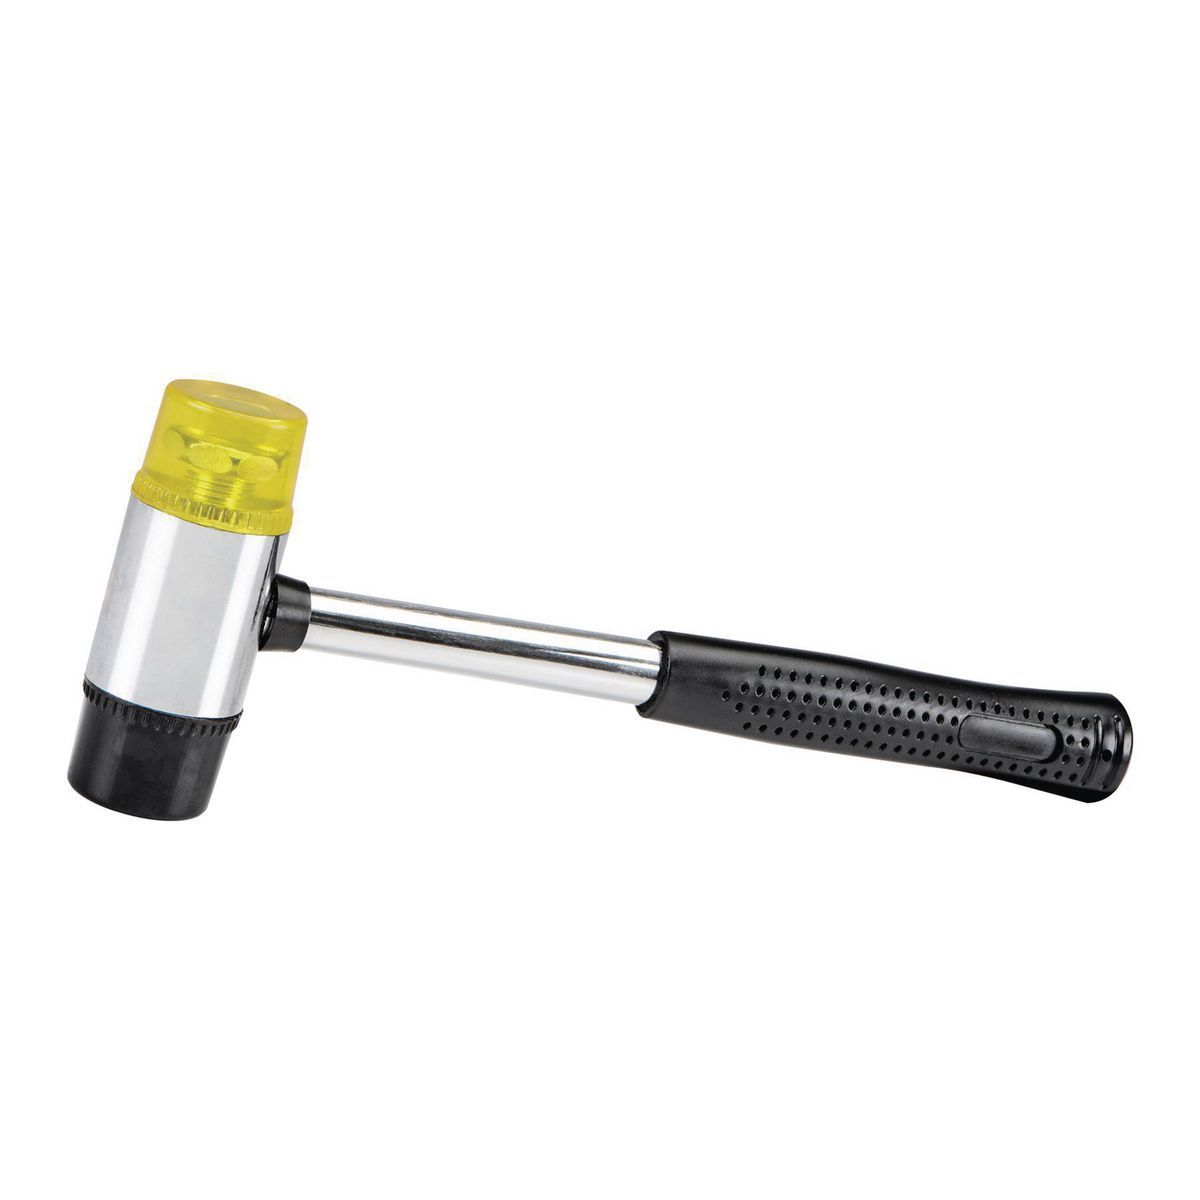 PITTSBURGH 1-1/2 lb. Soft Face Mallet